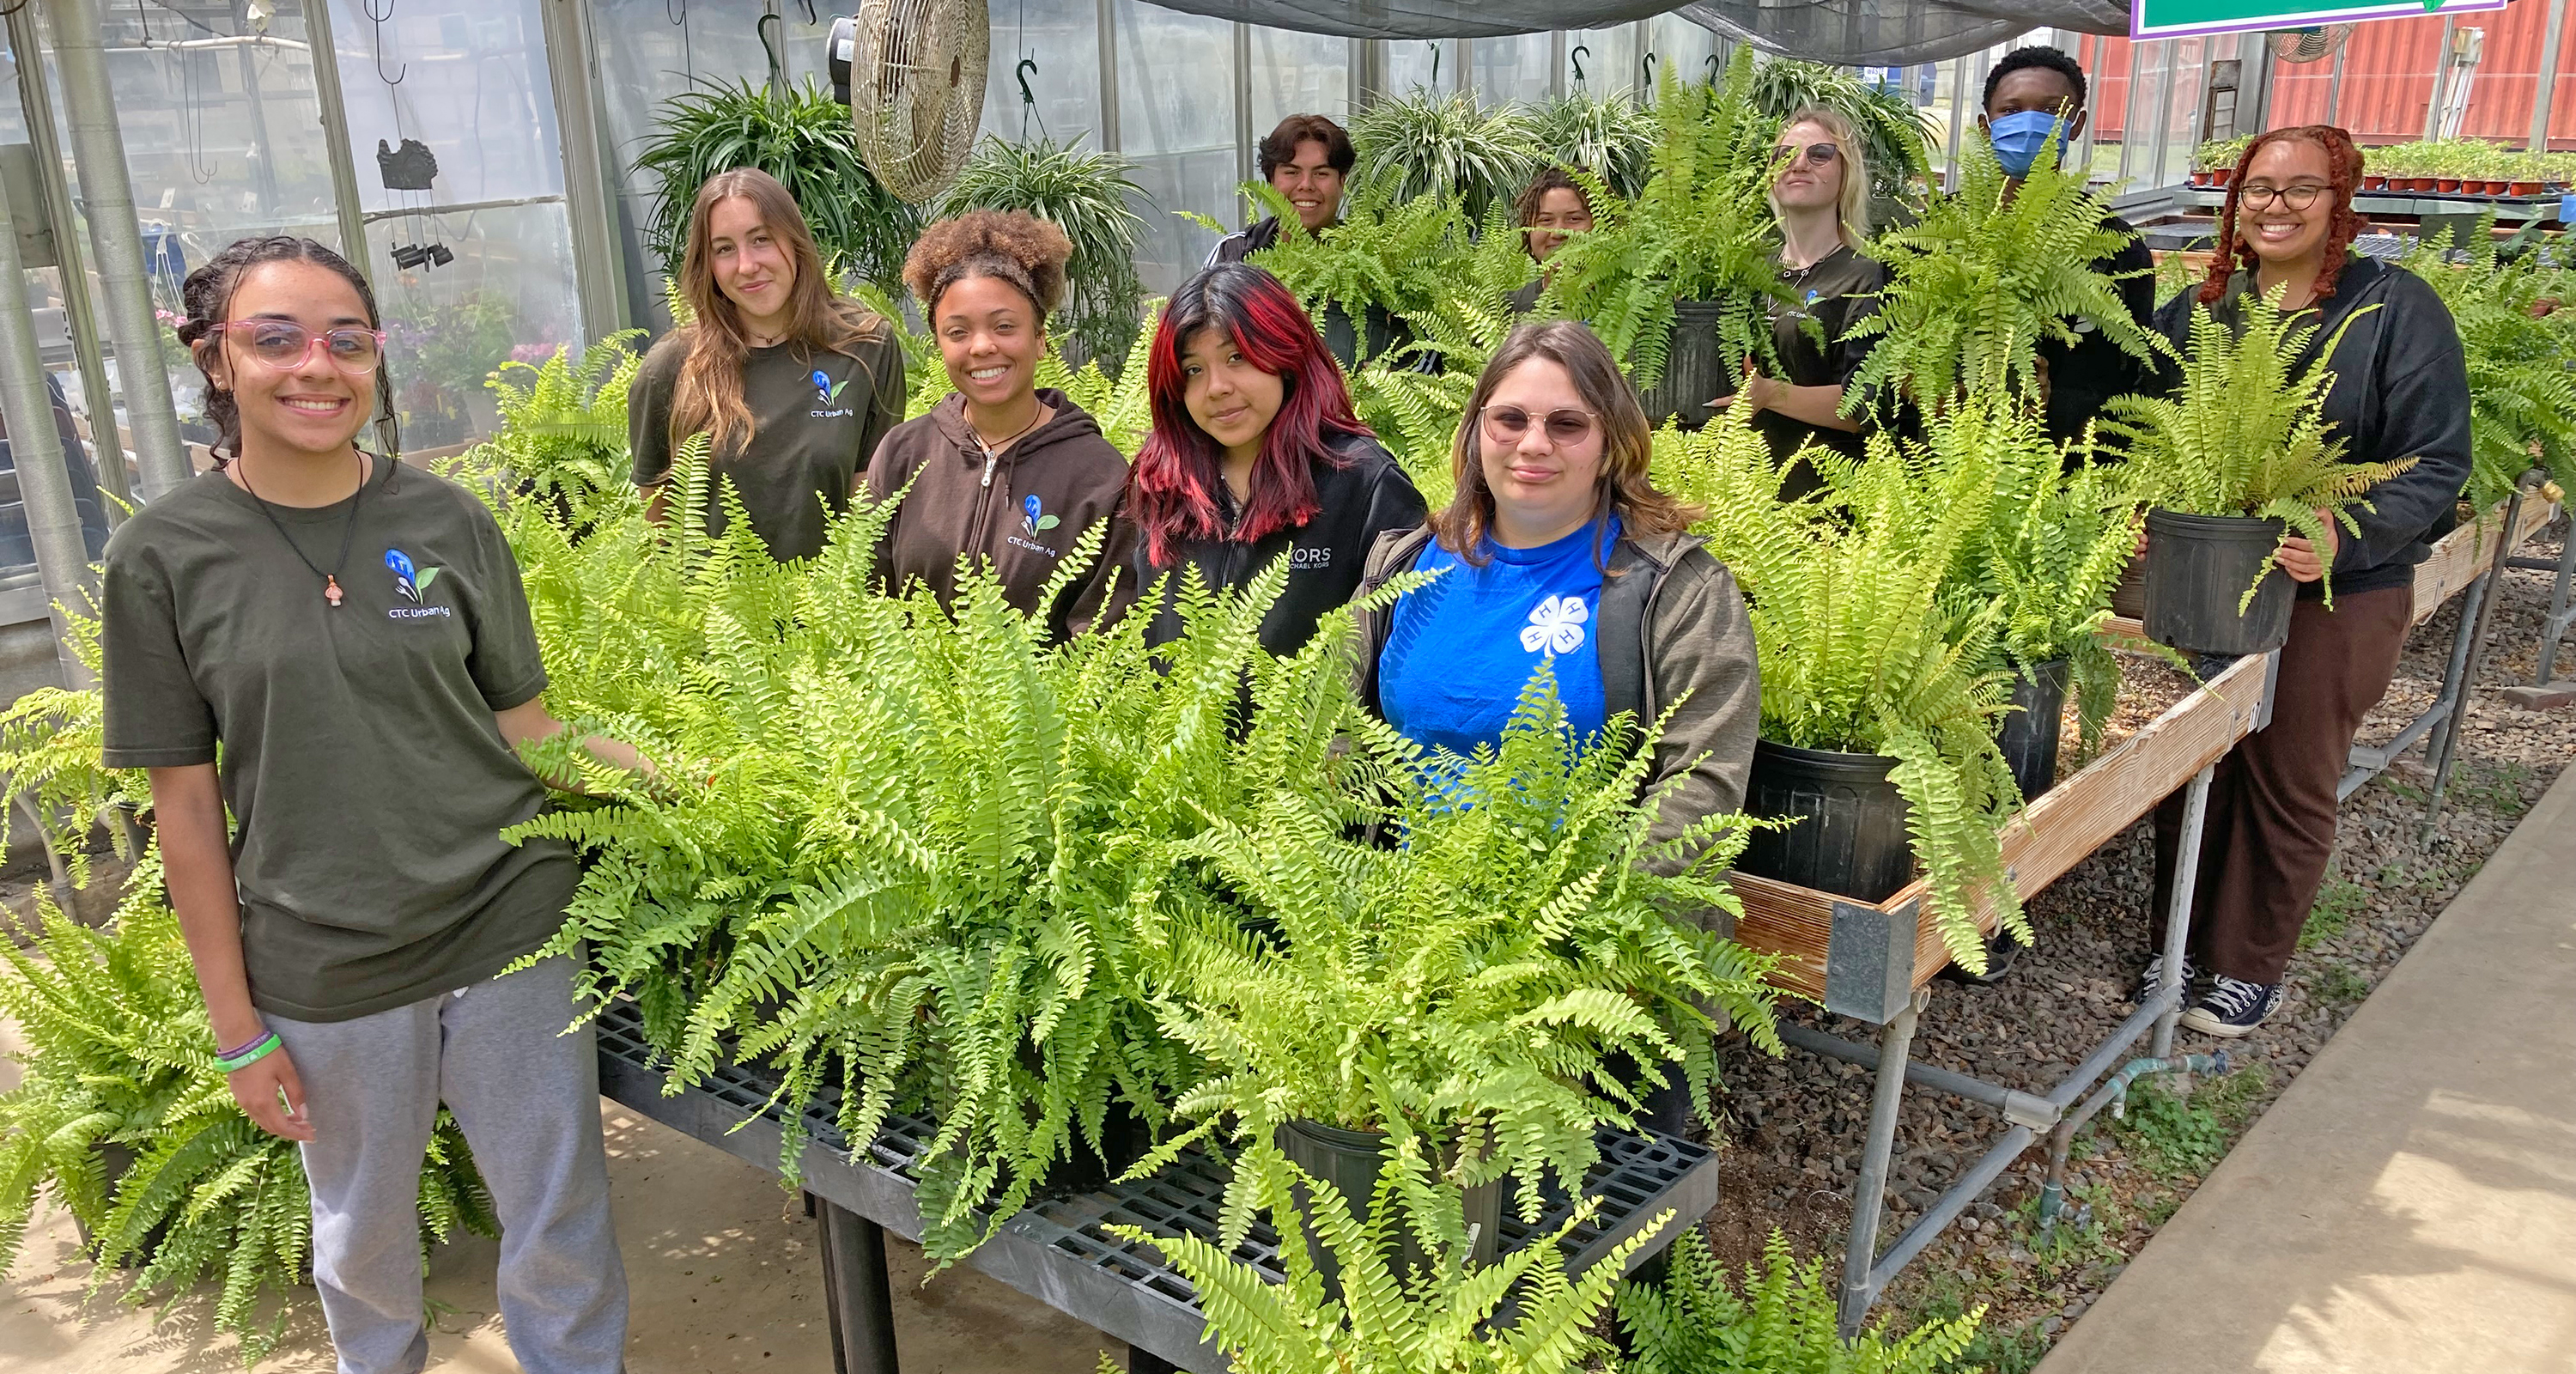 A group of students standing in front ferns in a greenhouse